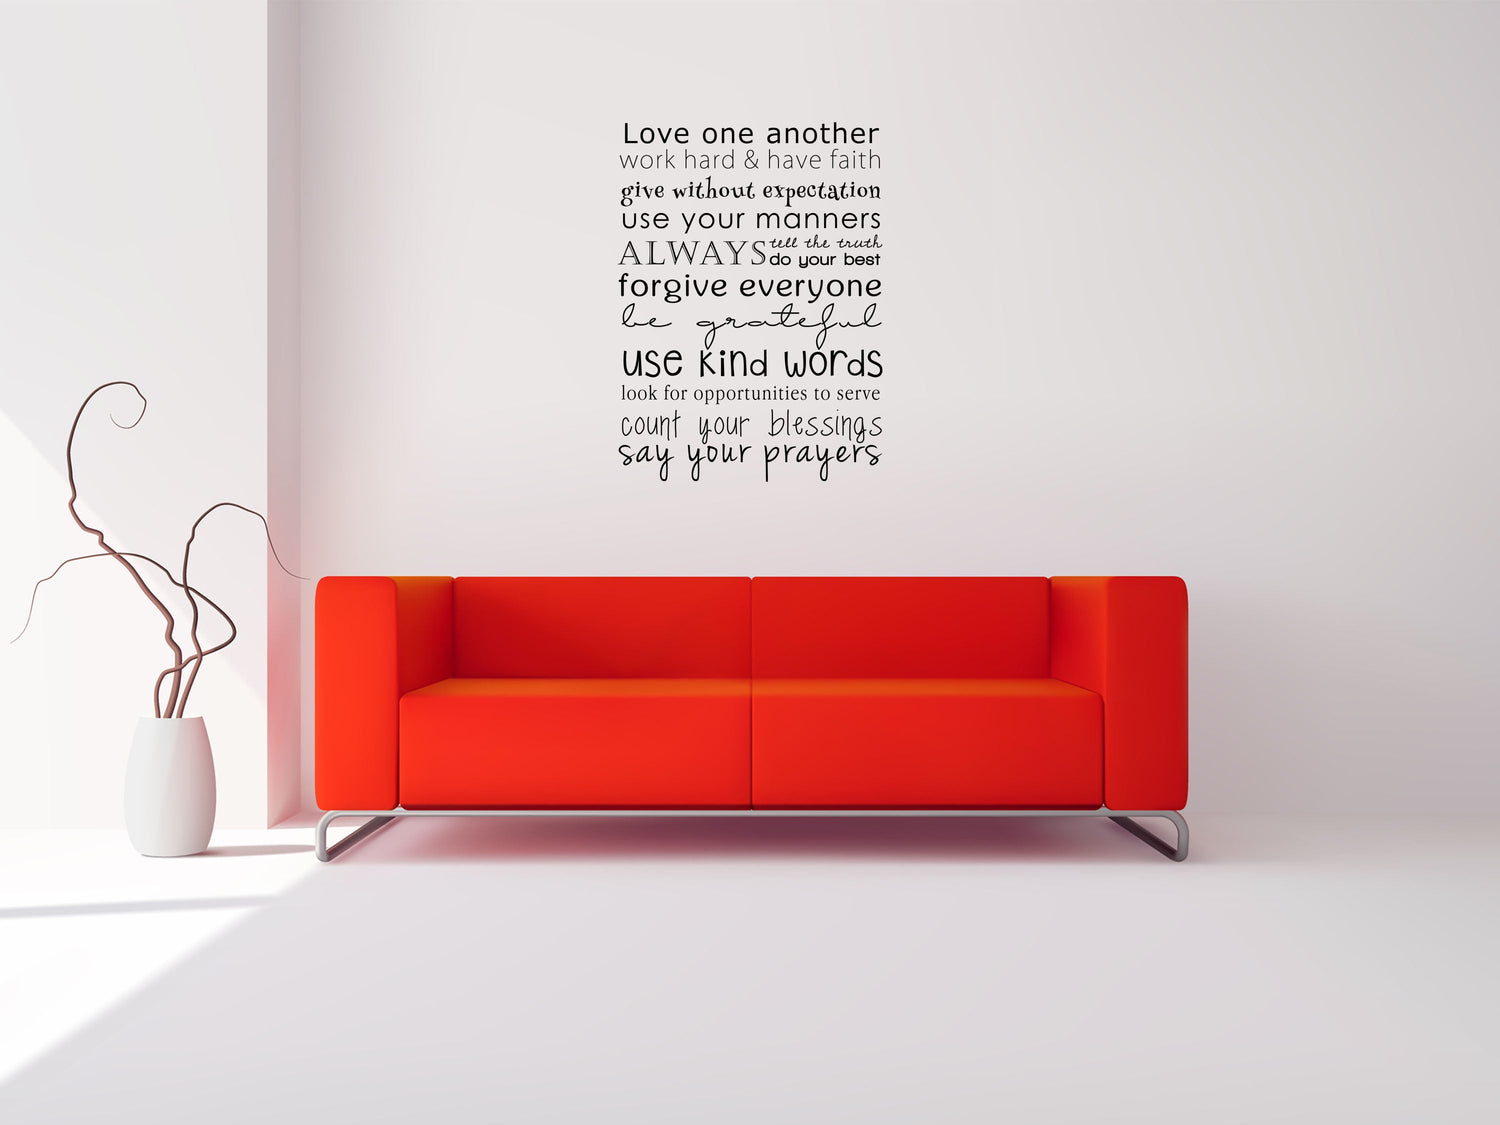 Love One Another, Work Hard & Have Faith - Inspirational Wall Decals Vinyl Wall Decal Inspirational Wall Signs 